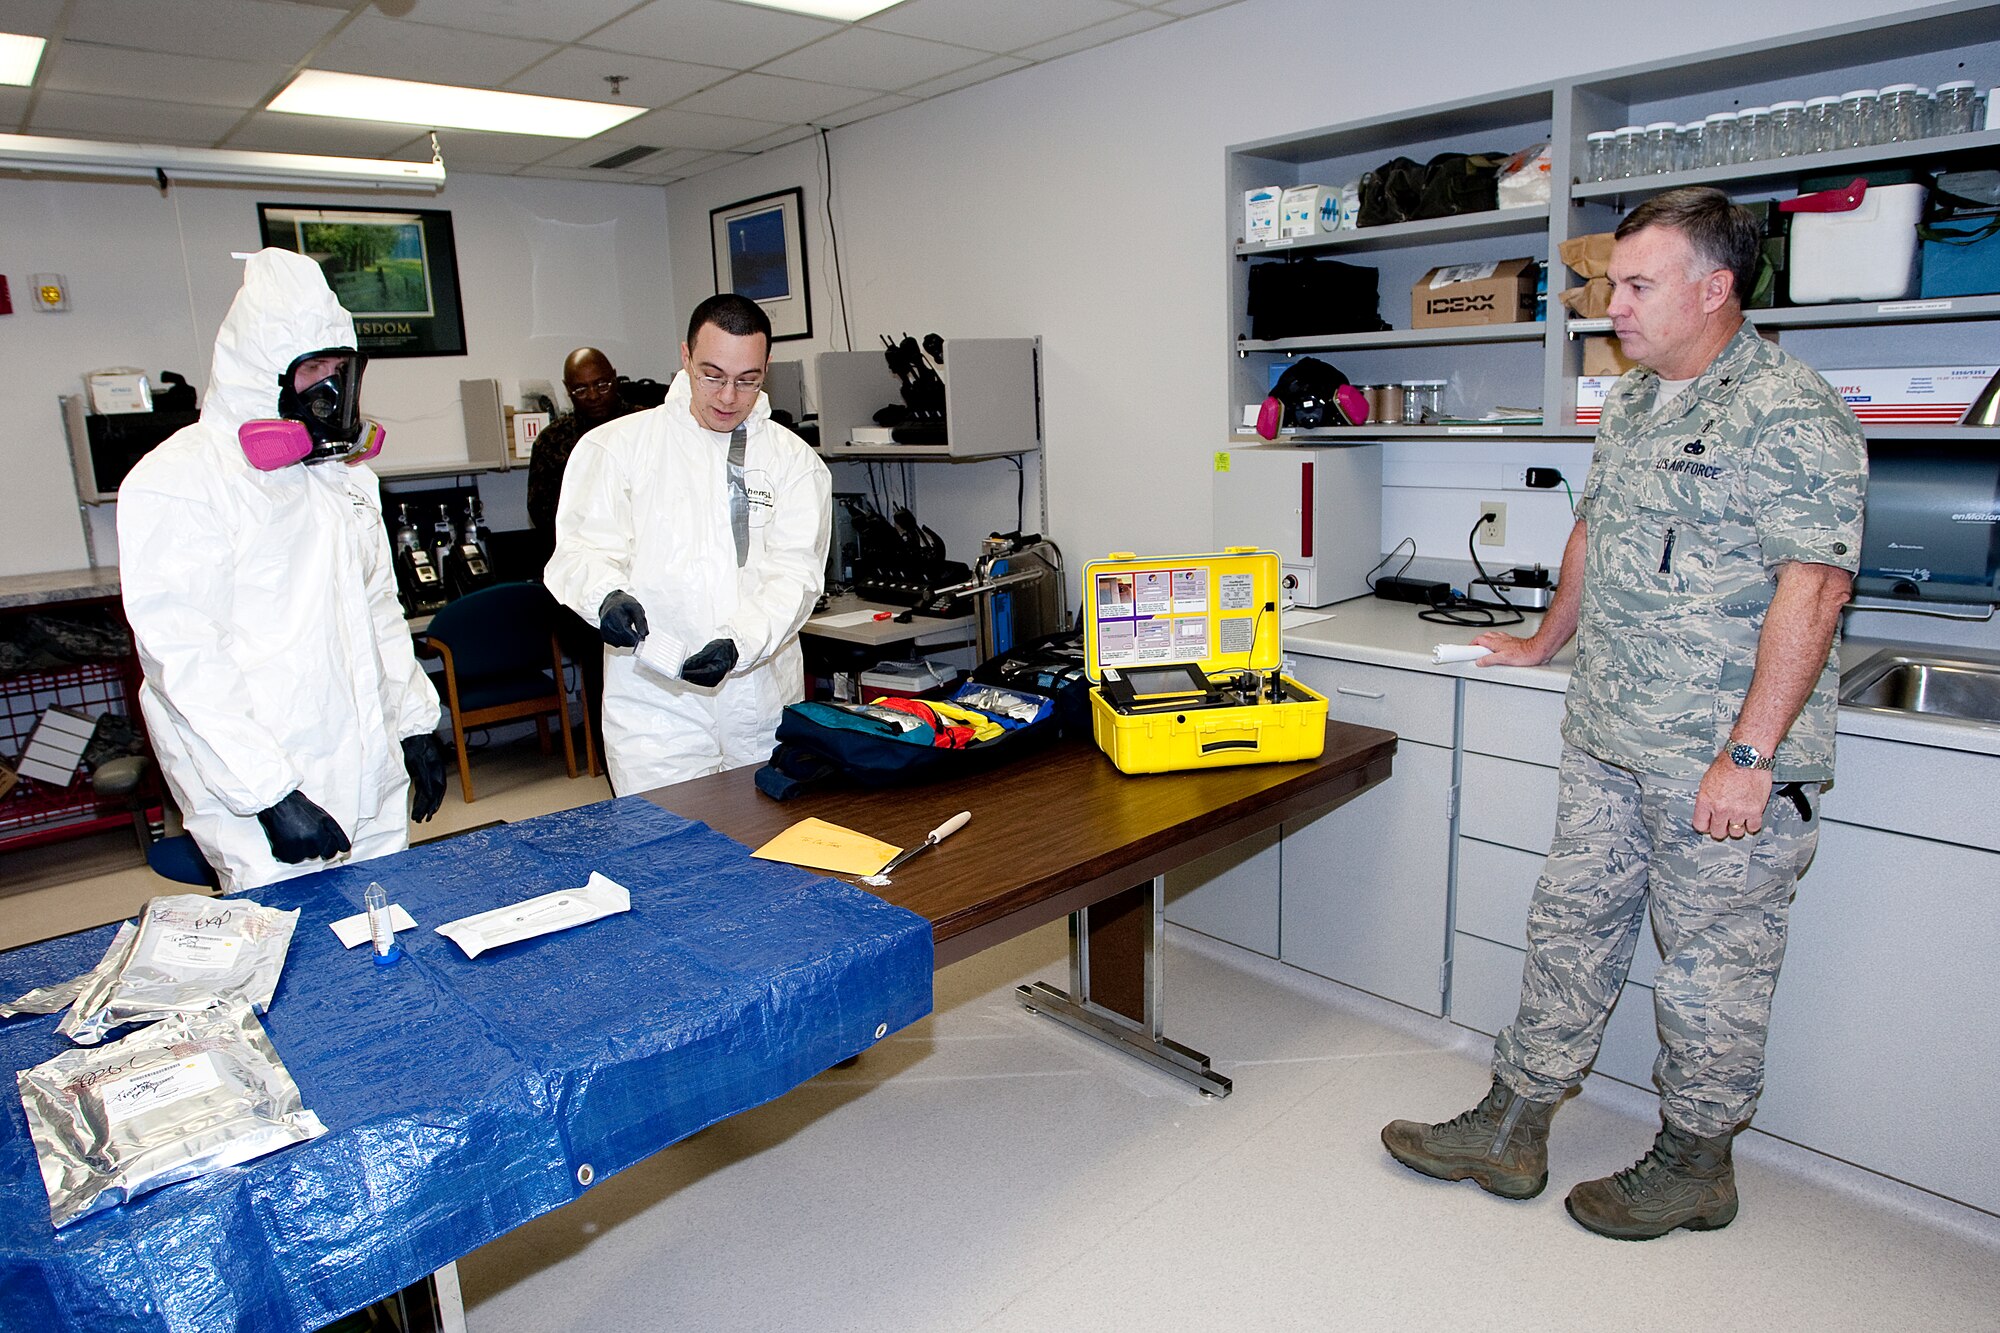 Brig. Gen. James Carroll, Assistant Surgeon General, Modernization and Biomedical Sciences Corps. Chief, observes Senior Airman Daniel Rivera and Airman 1st Class Blake Everhart, both from the 90th Medical Operations Squadron, as they give an equipment demonstration in the medical center here June 16. (U.S. Air Force photo by Matt Bilden)